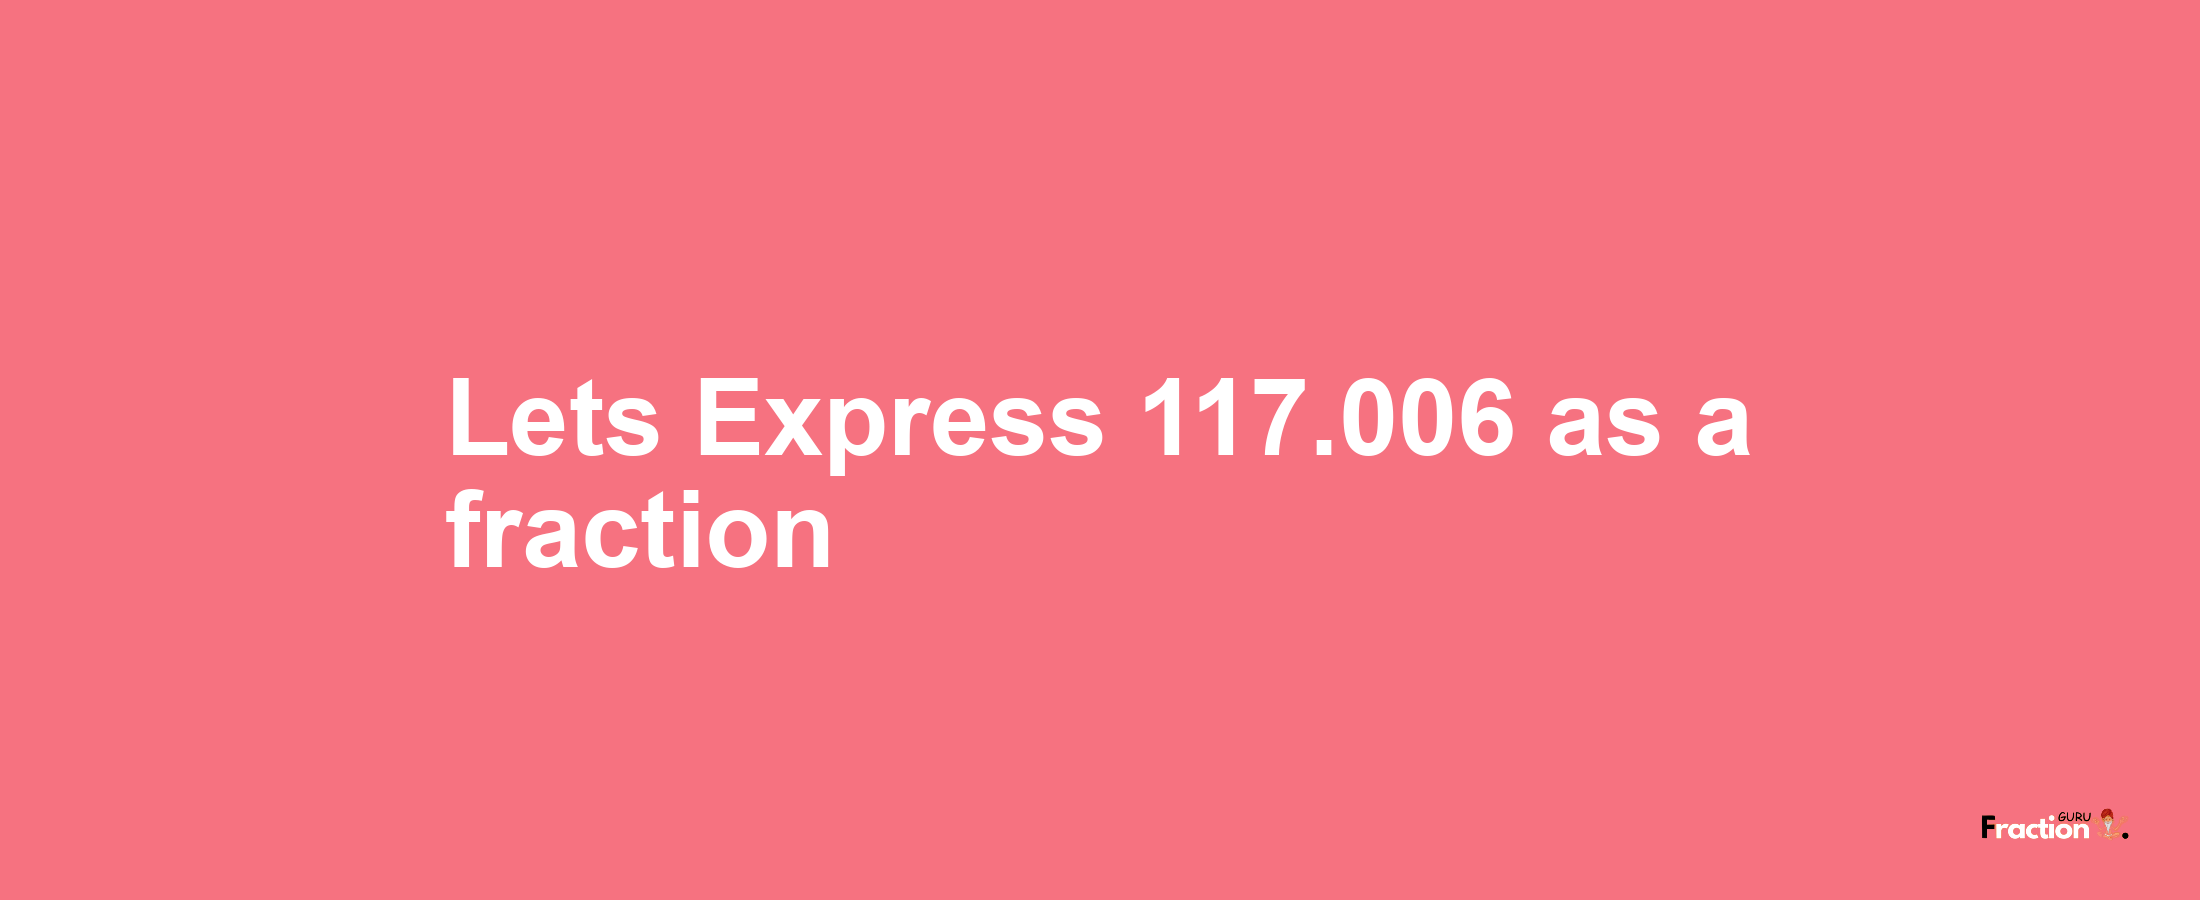 Lets Express 117.006 as afraction